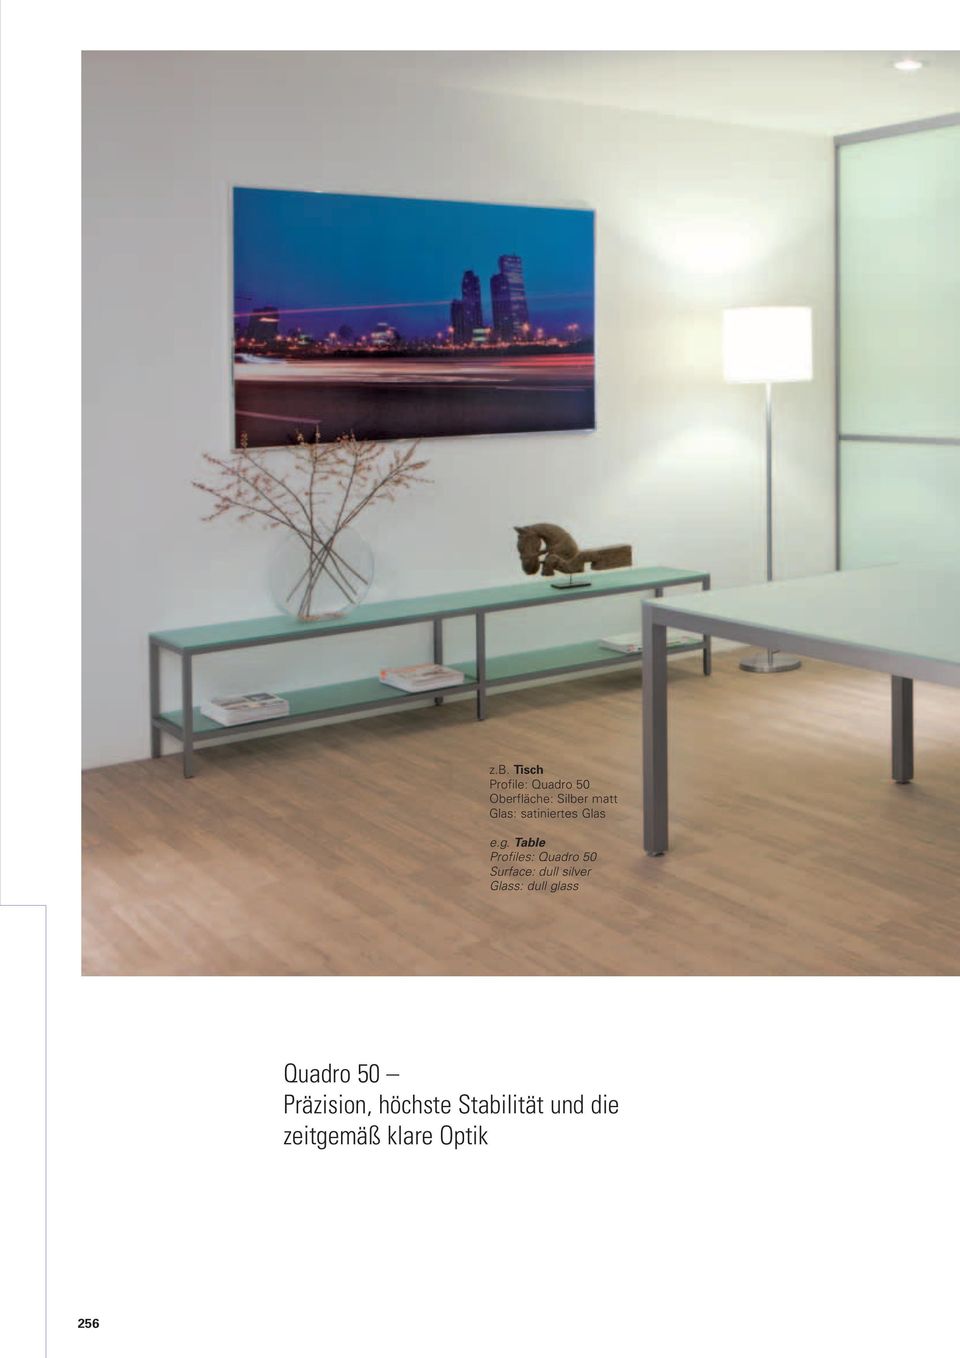 Table Profiles: Quadro 50 Surface: dull silver Glass: